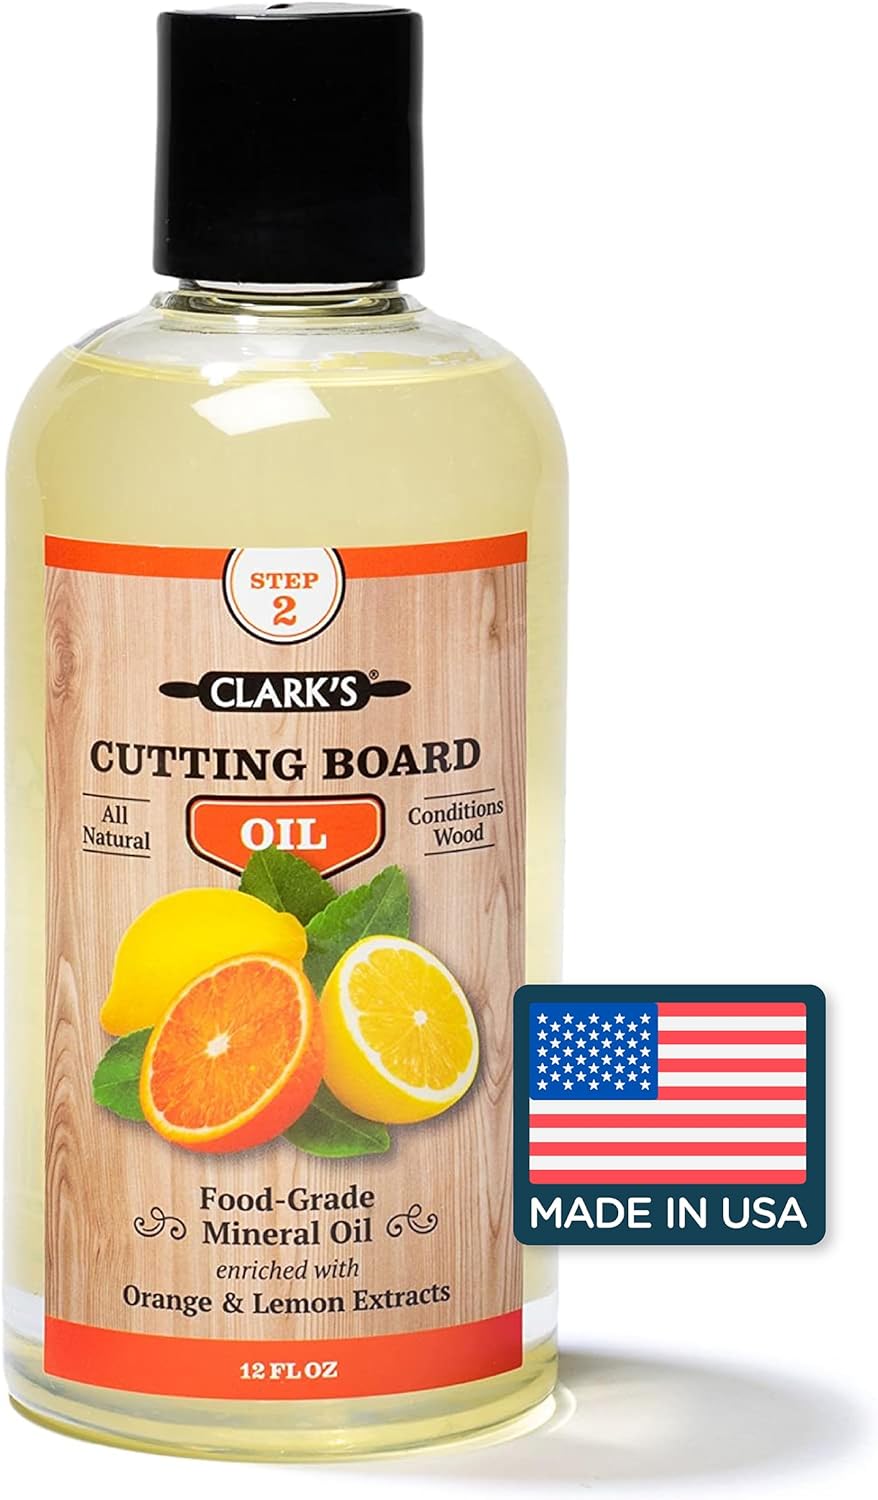 CLARK'S Cutting Board Oil - Food Grade Mineral Oil for Cutting Board - Enriched with Lemon and Orange Oils - Butcher Block Oil and Conditioner - Mineral Oil - Restores and Protects All Wood - 12oz